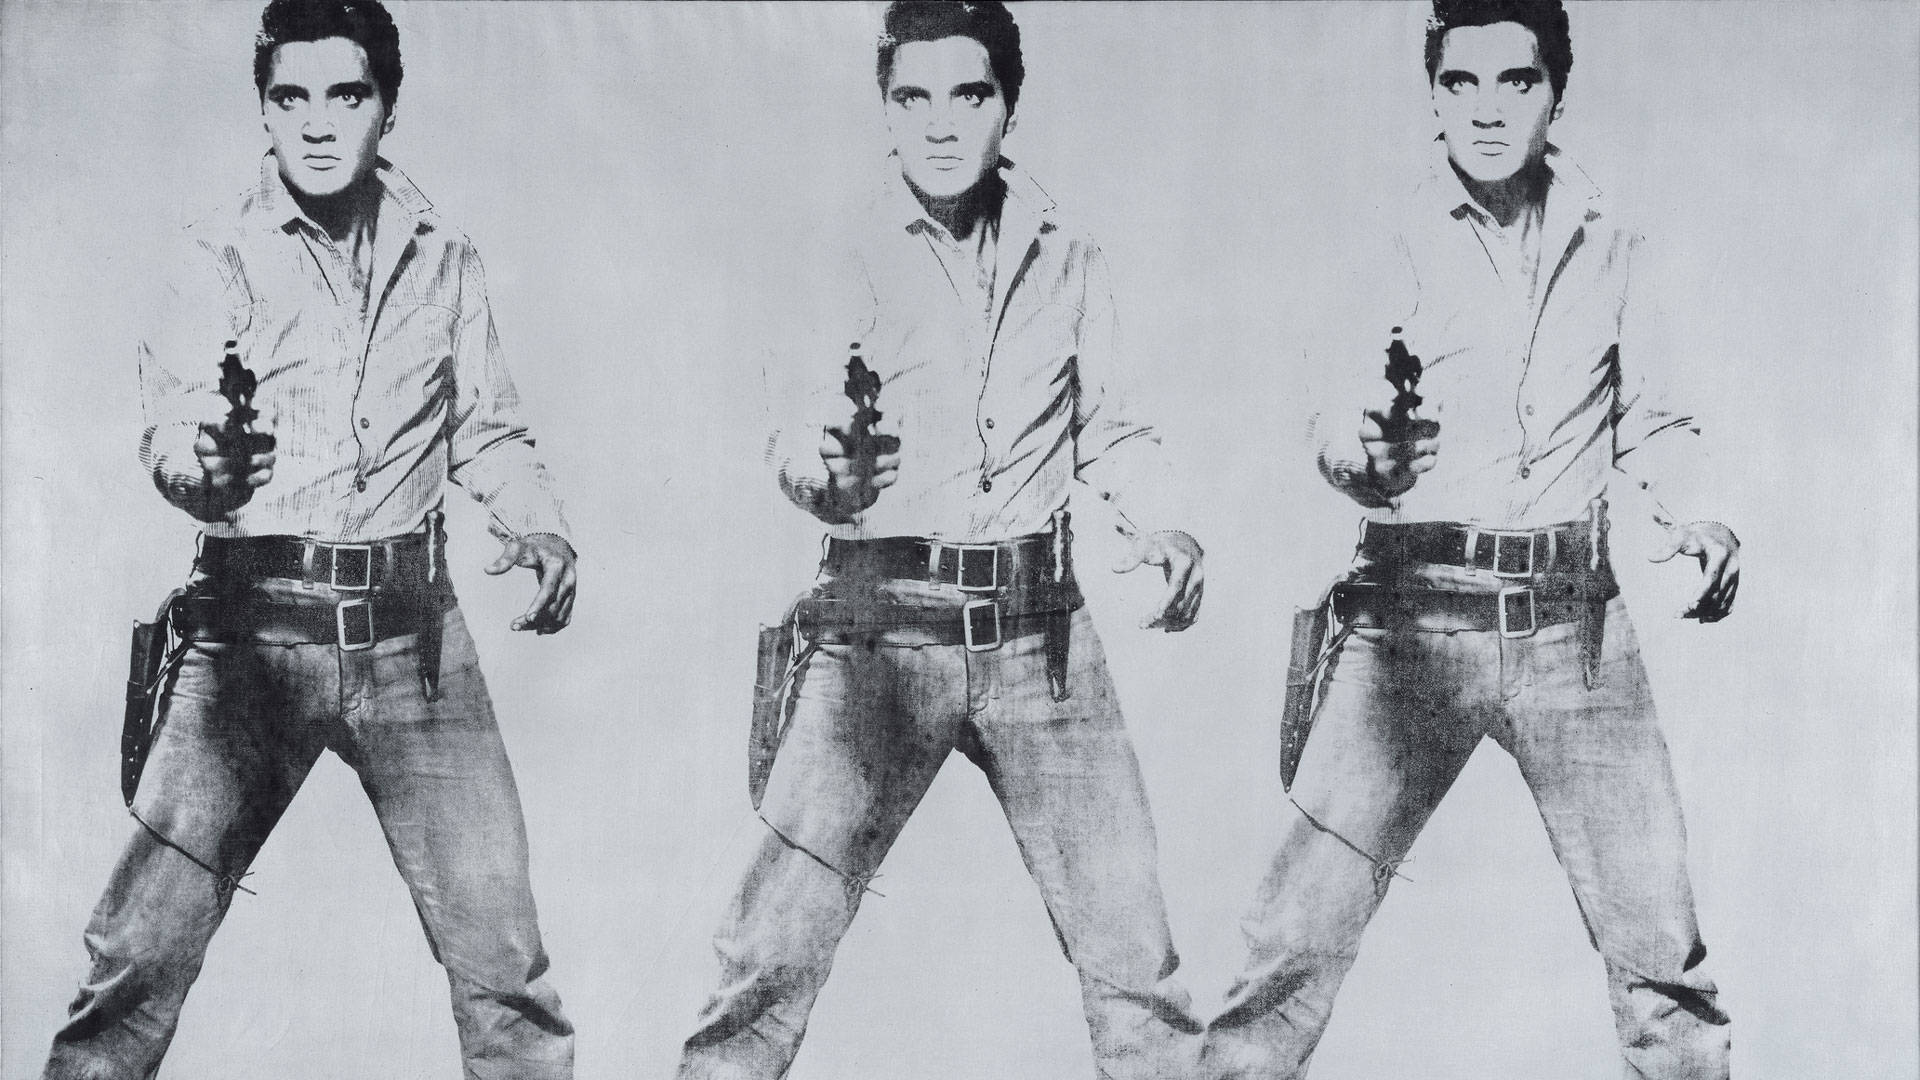 Andy Warhol, 'Triple Elvis [Ferus Type],' 1963. © The Andy Warhol Foundation for the Visual Arts, Inc. / Artists Rights Society (ARS) New York.